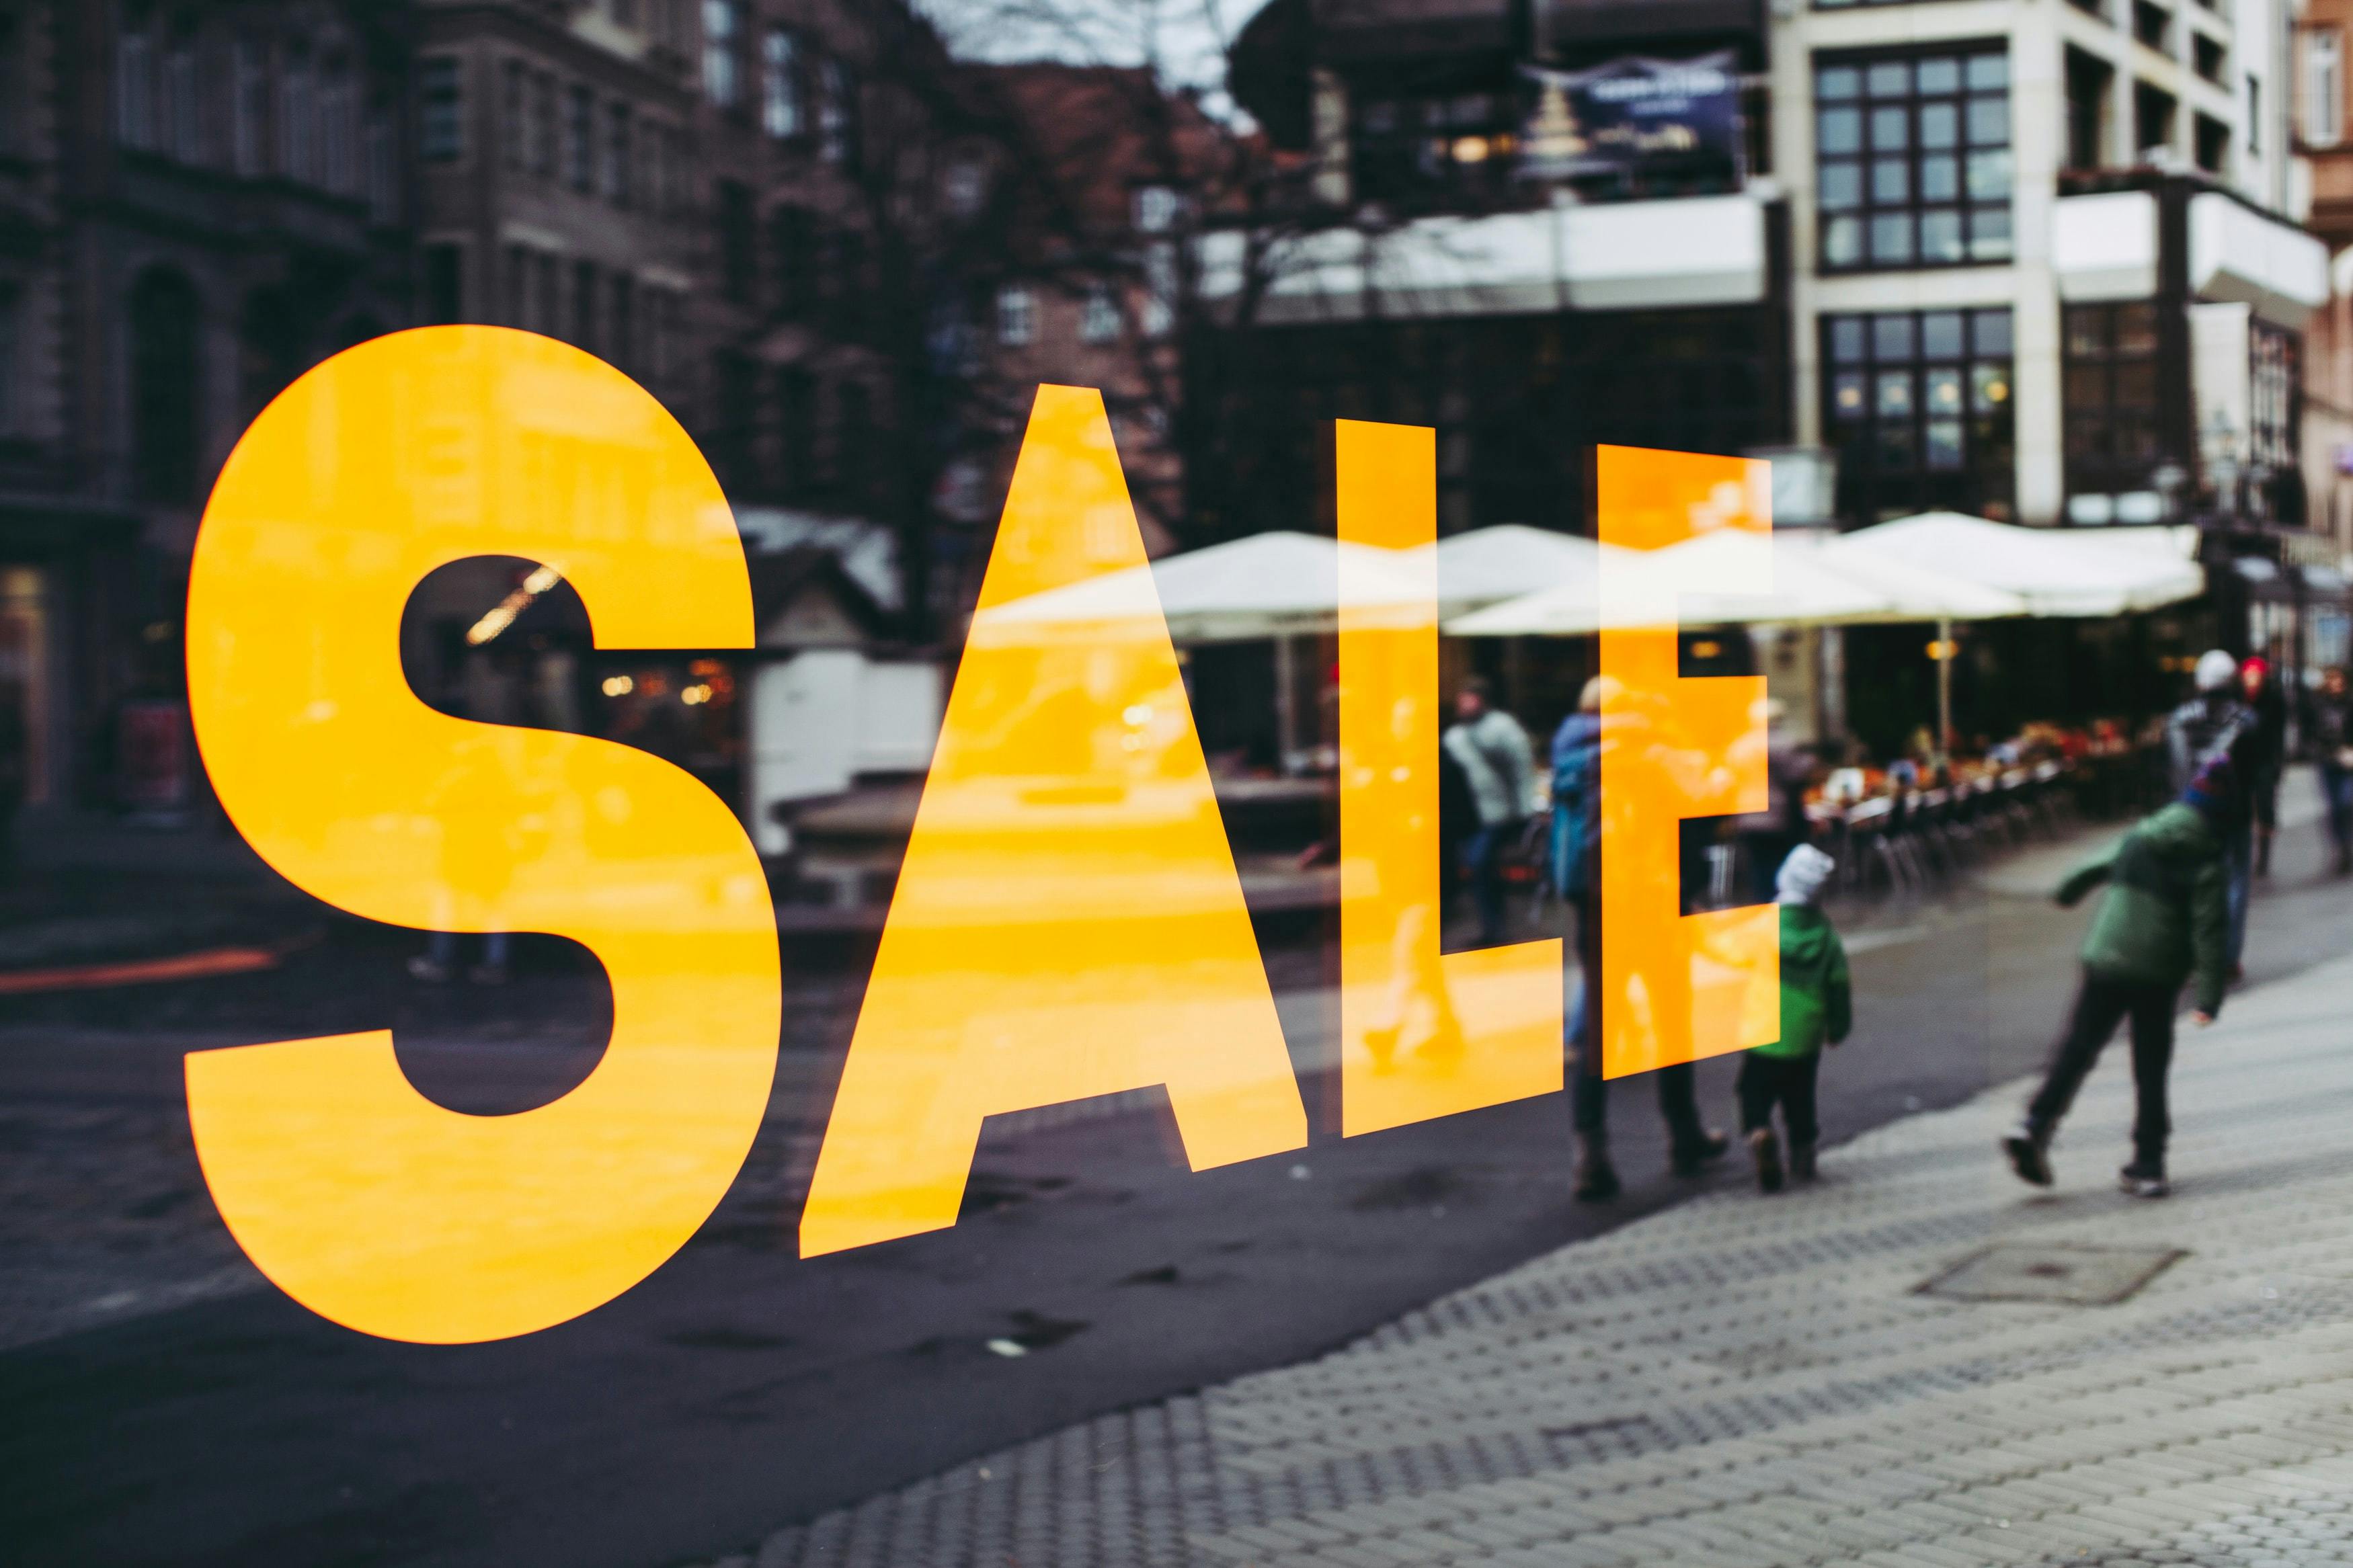 Image of a sale sign in a store window